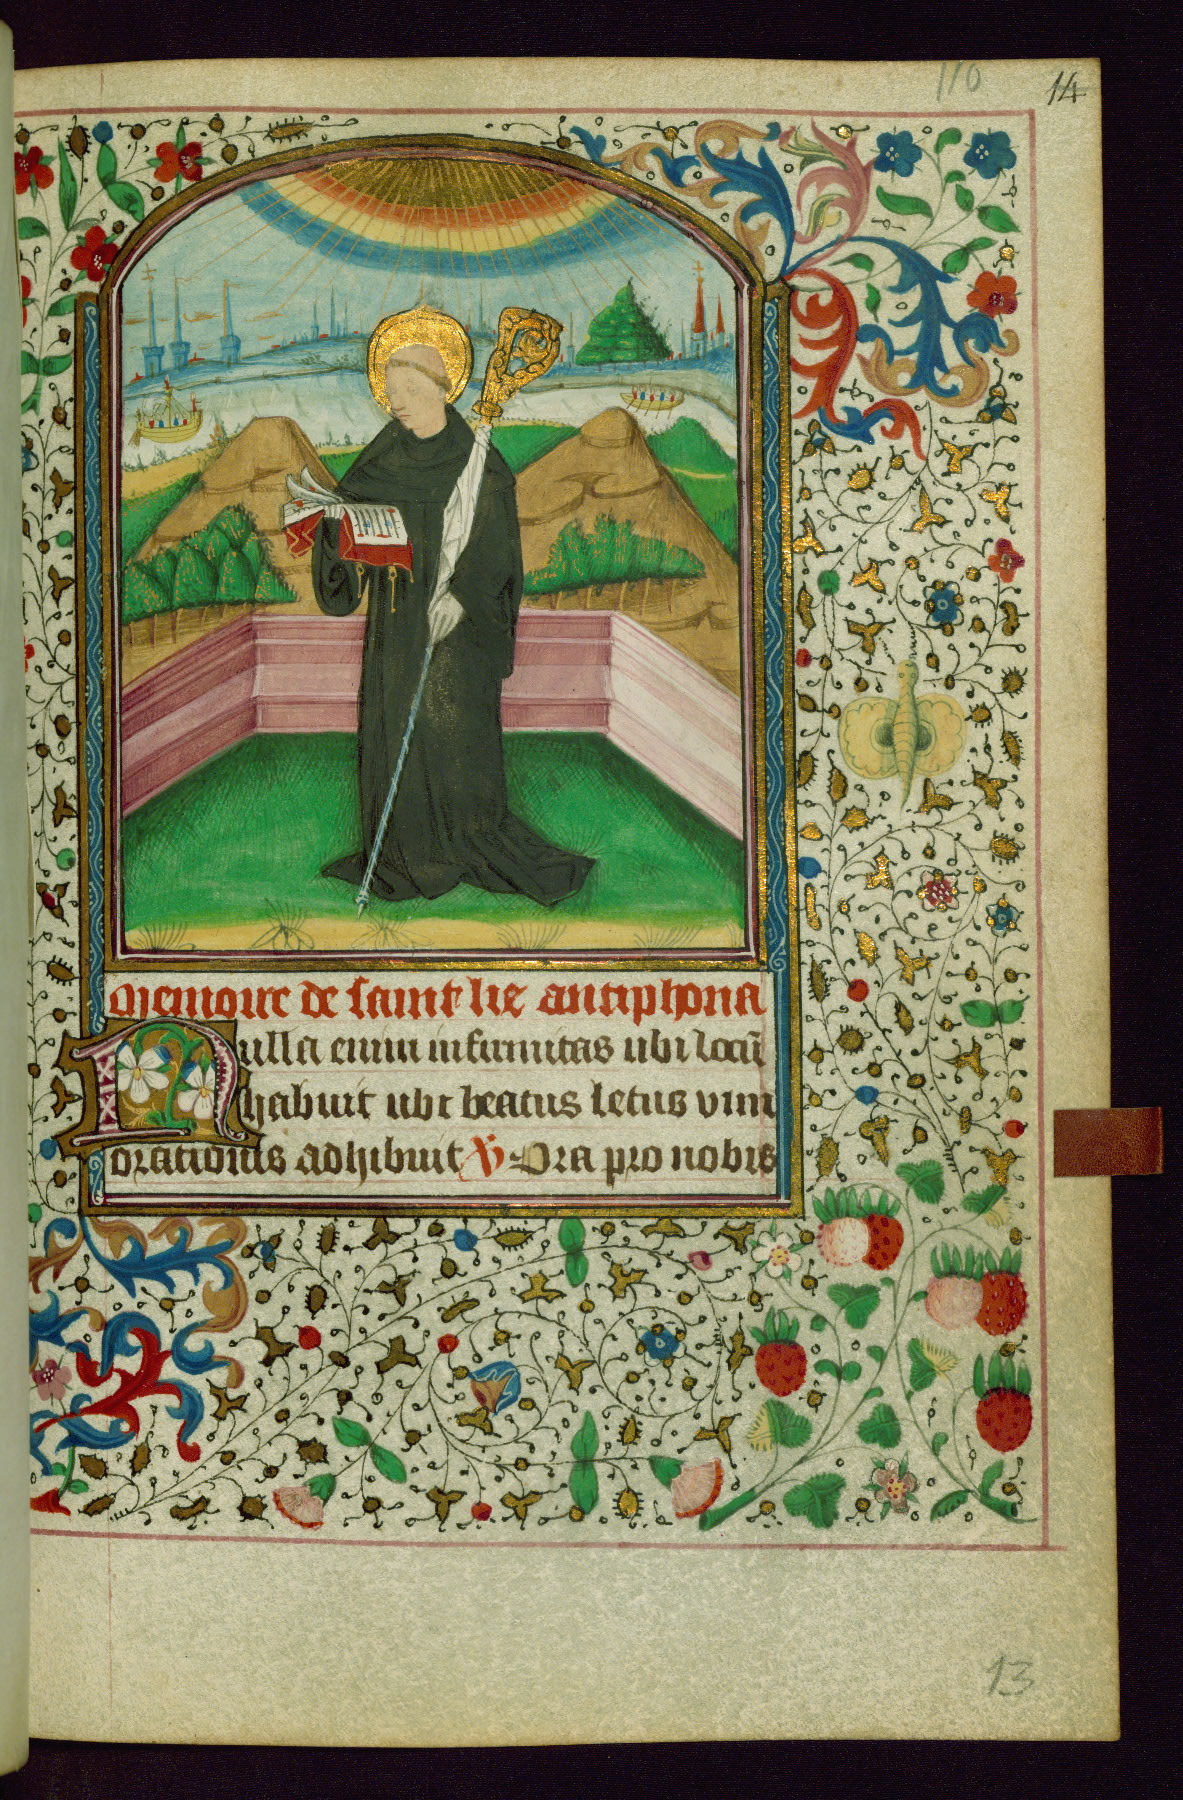 research on book of hours